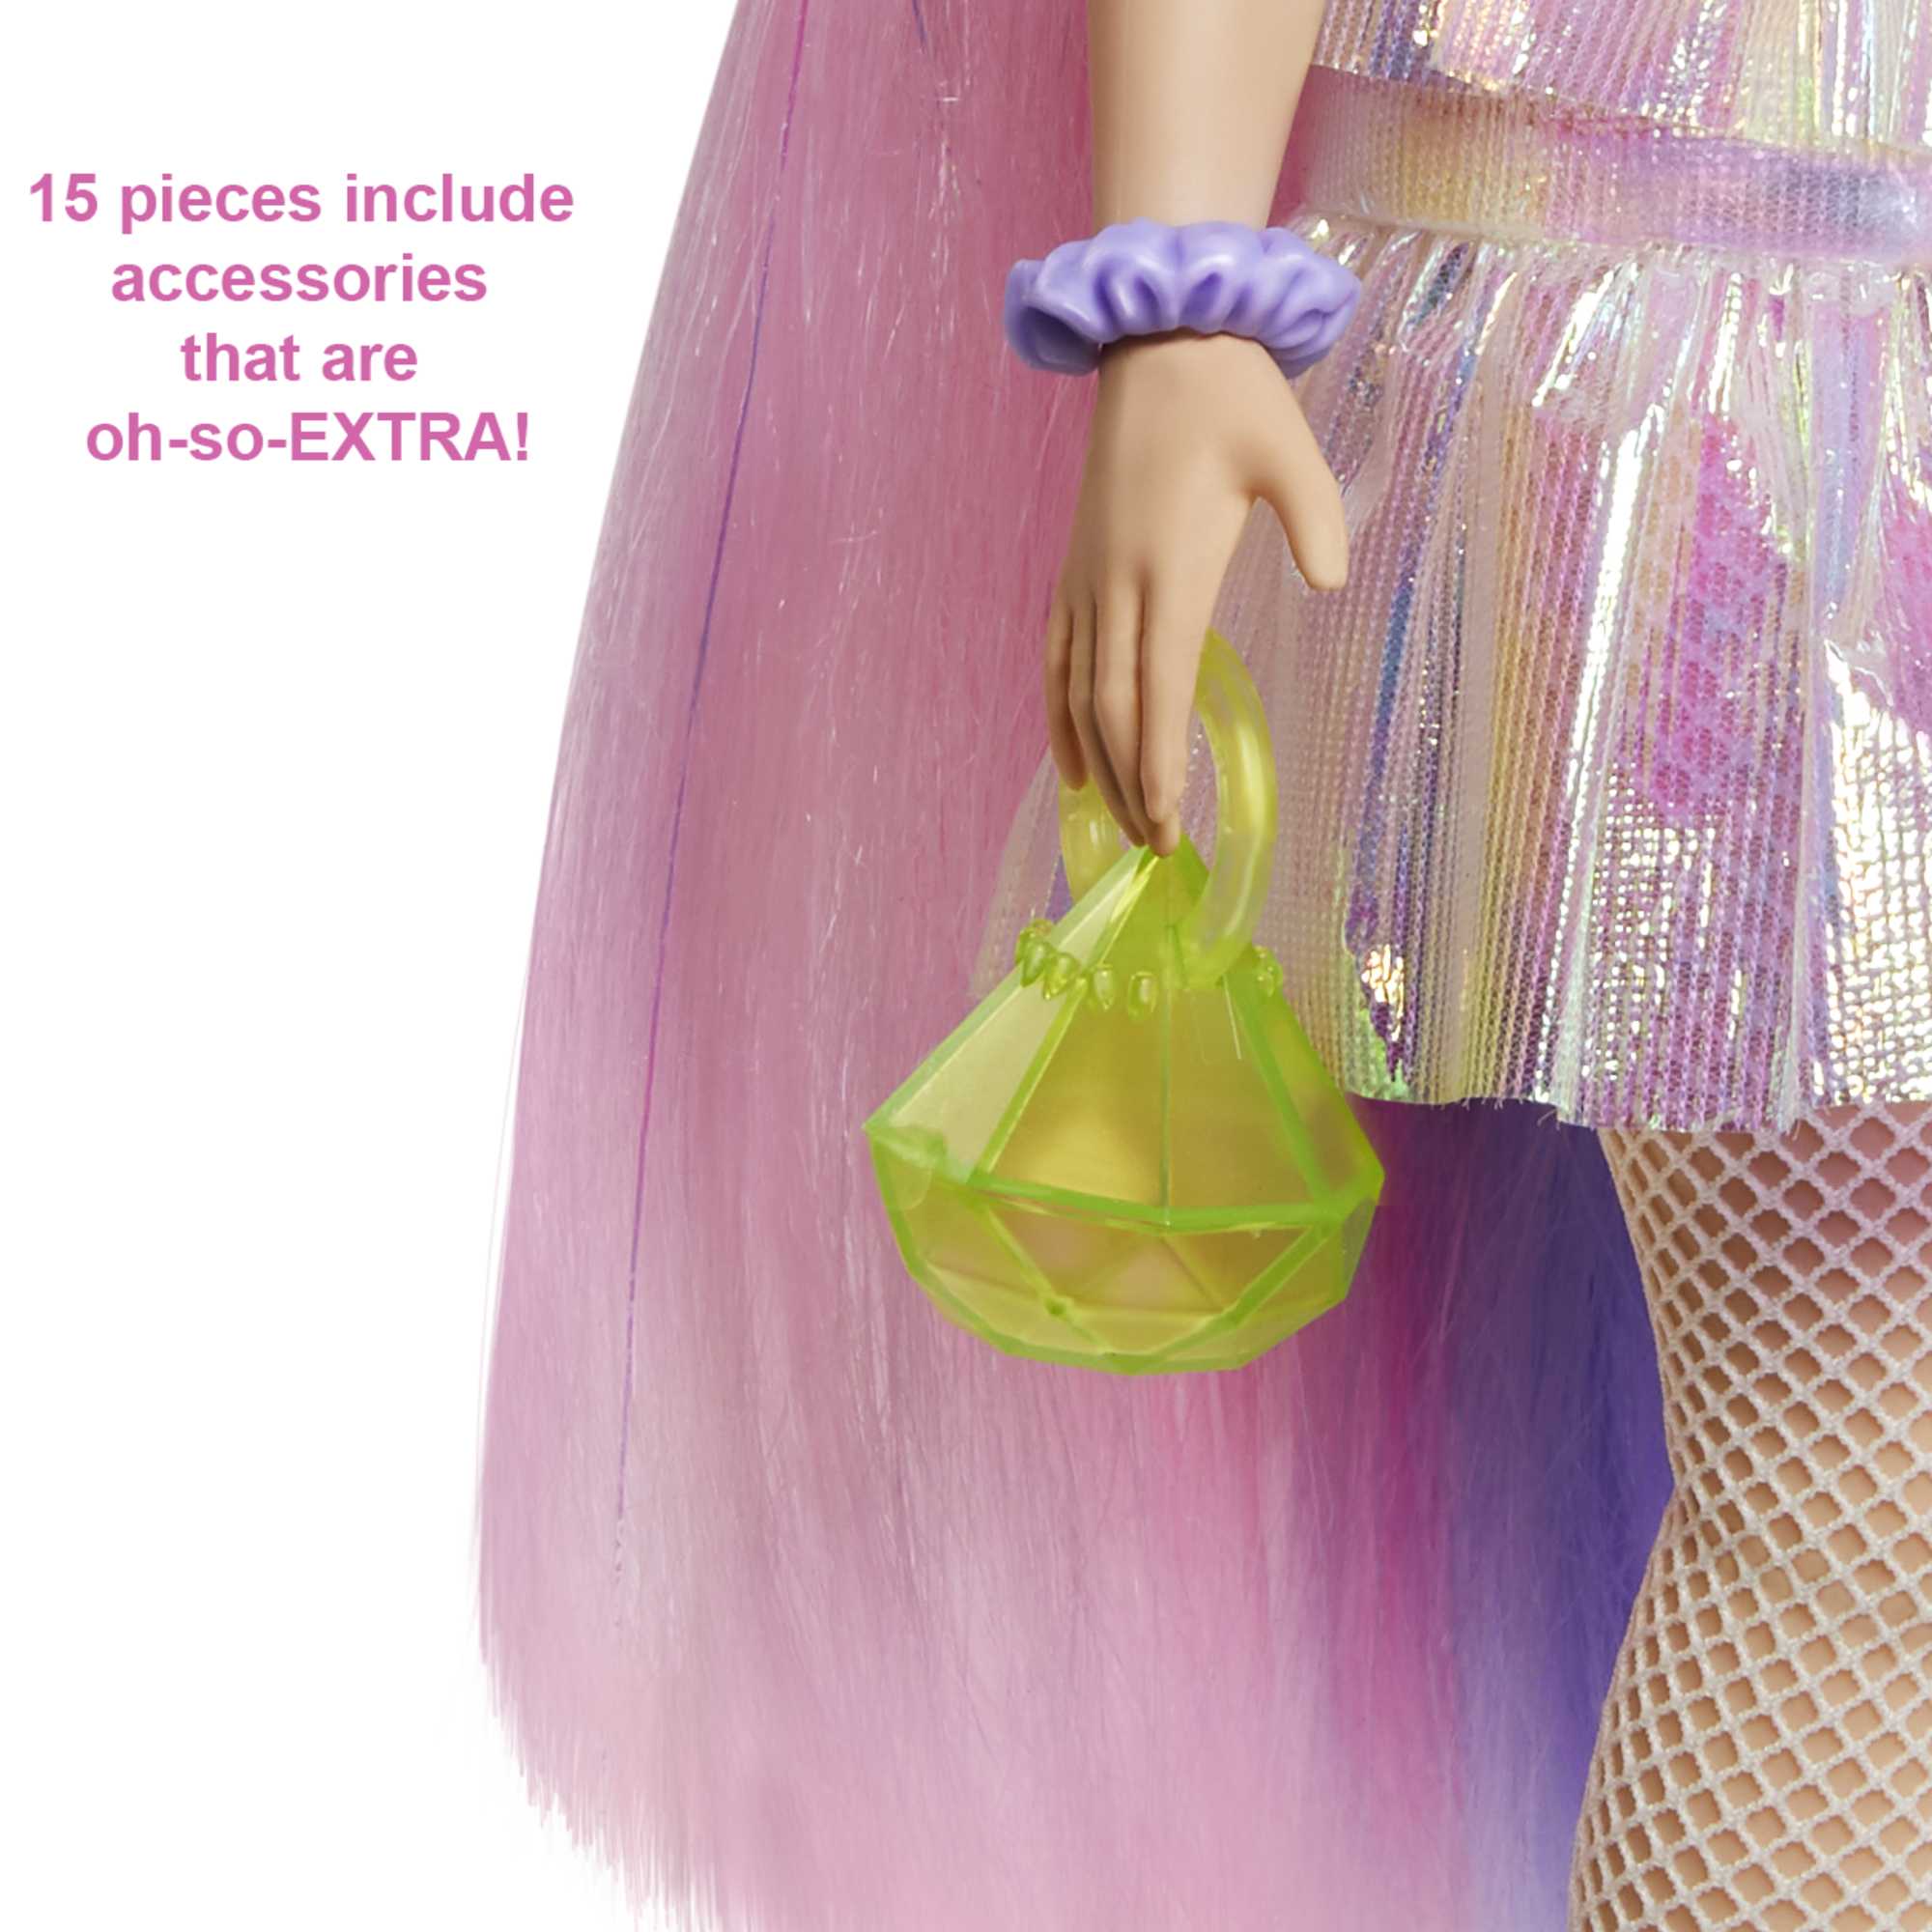 Barbie Extra Fashion Doll with Shimmery Look, Pink & Purple Fantasy Hair, Accessories & Pet - image 4 of 8